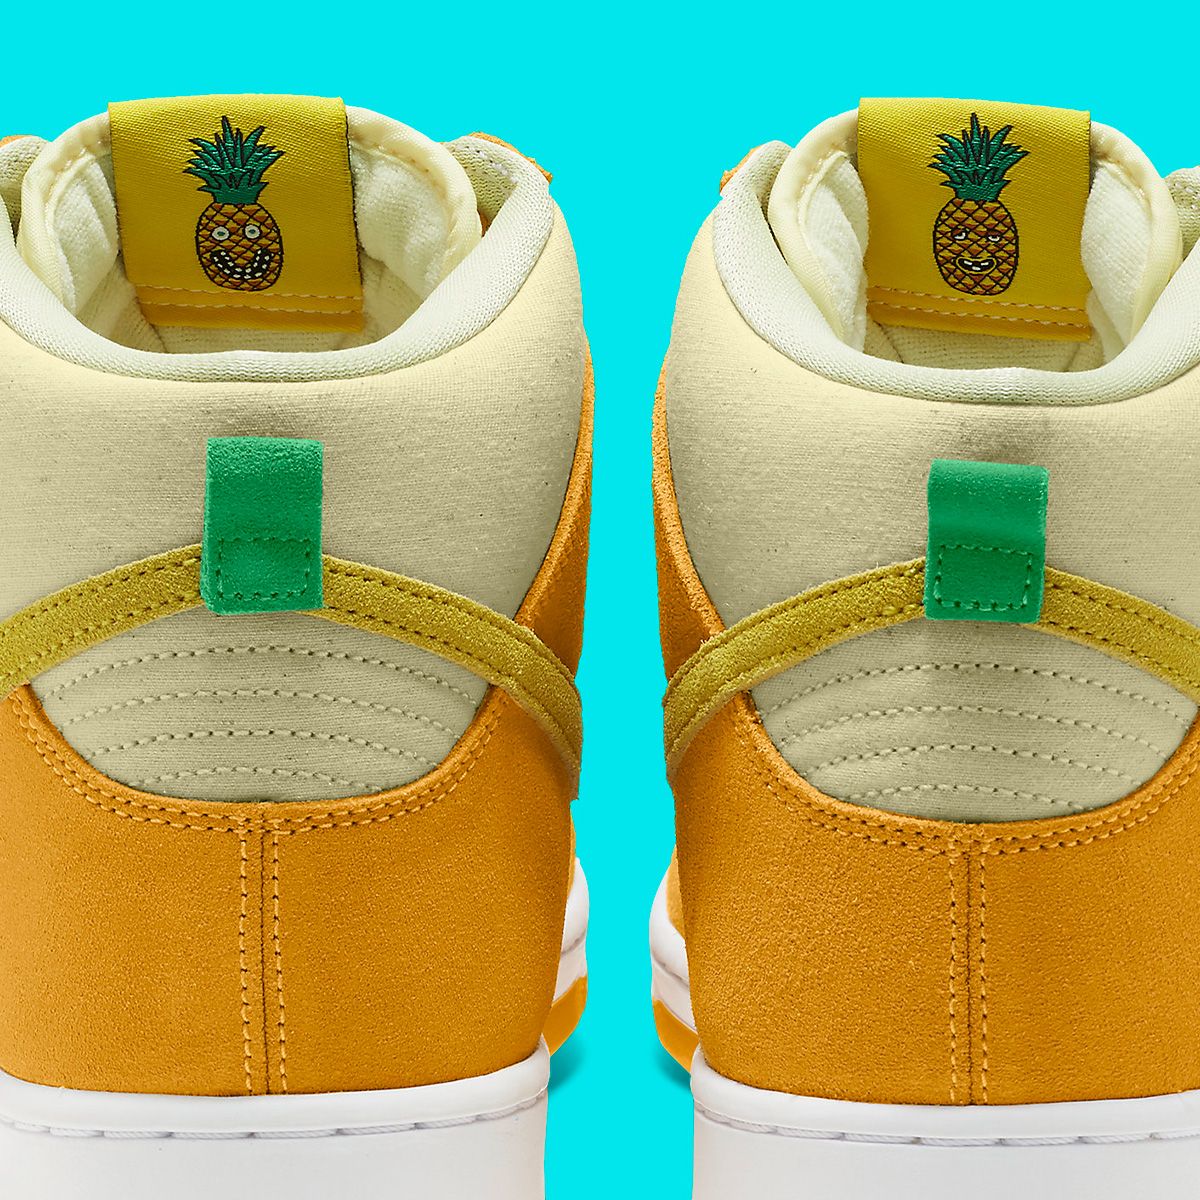 Official Images // Nike SB Dunk High “Pineapple” | House of Heat°